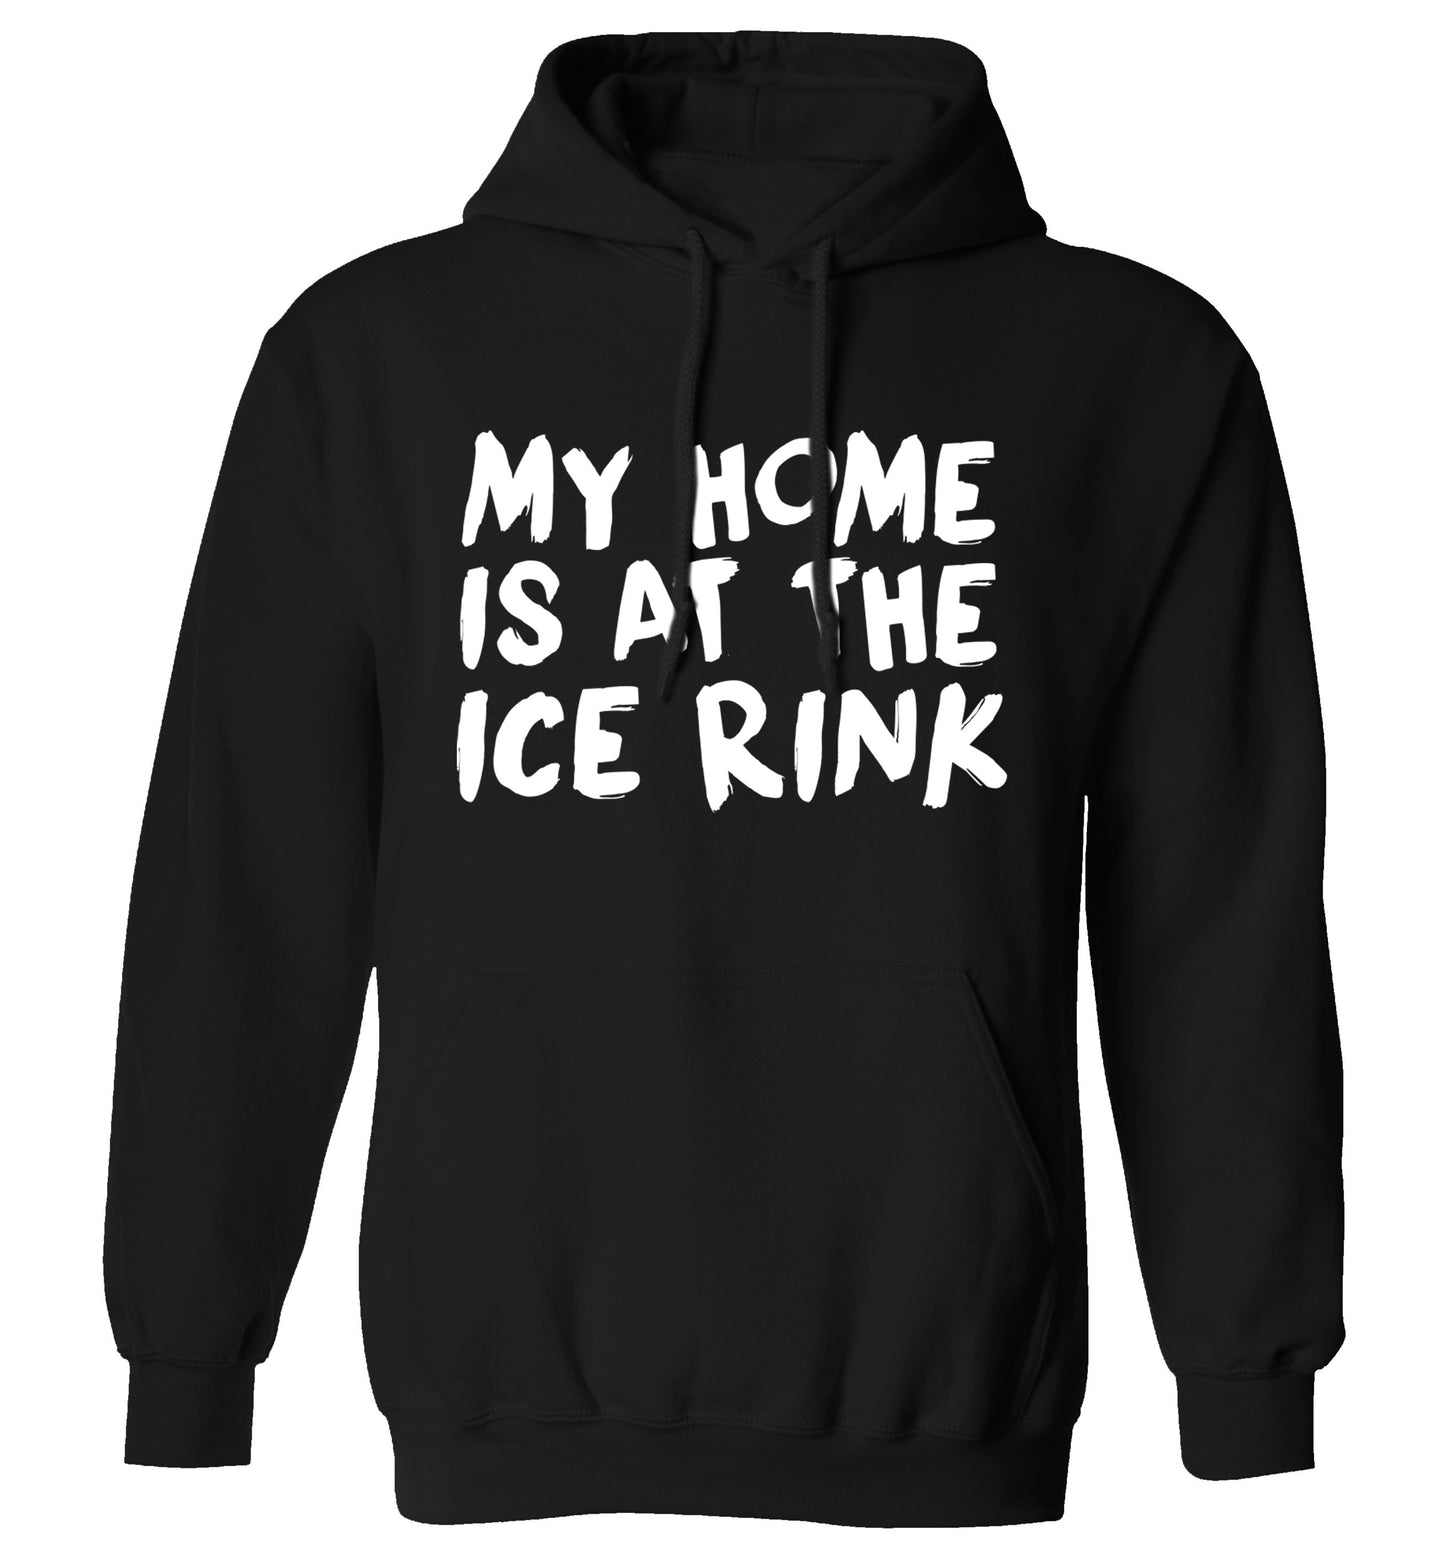 My home is at the ice rink adults unisex black hoodie 2XL